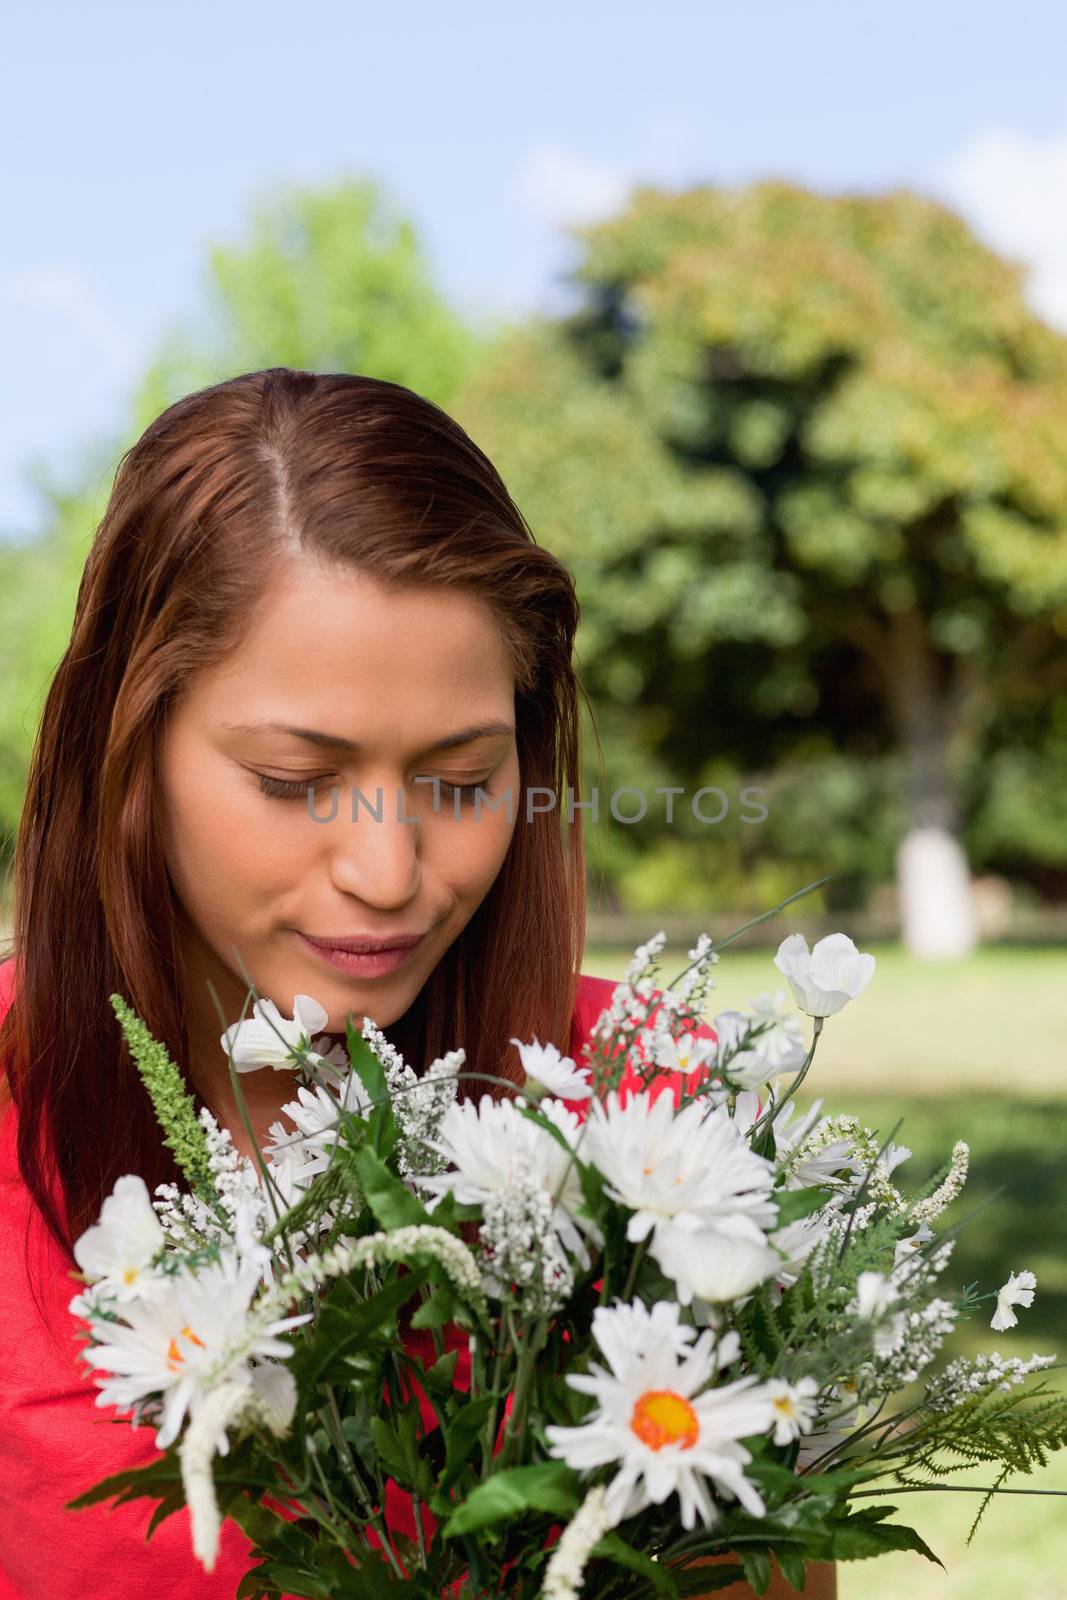 Young woman happily looking down towards a bunch of flowers while standing in an open grassland area